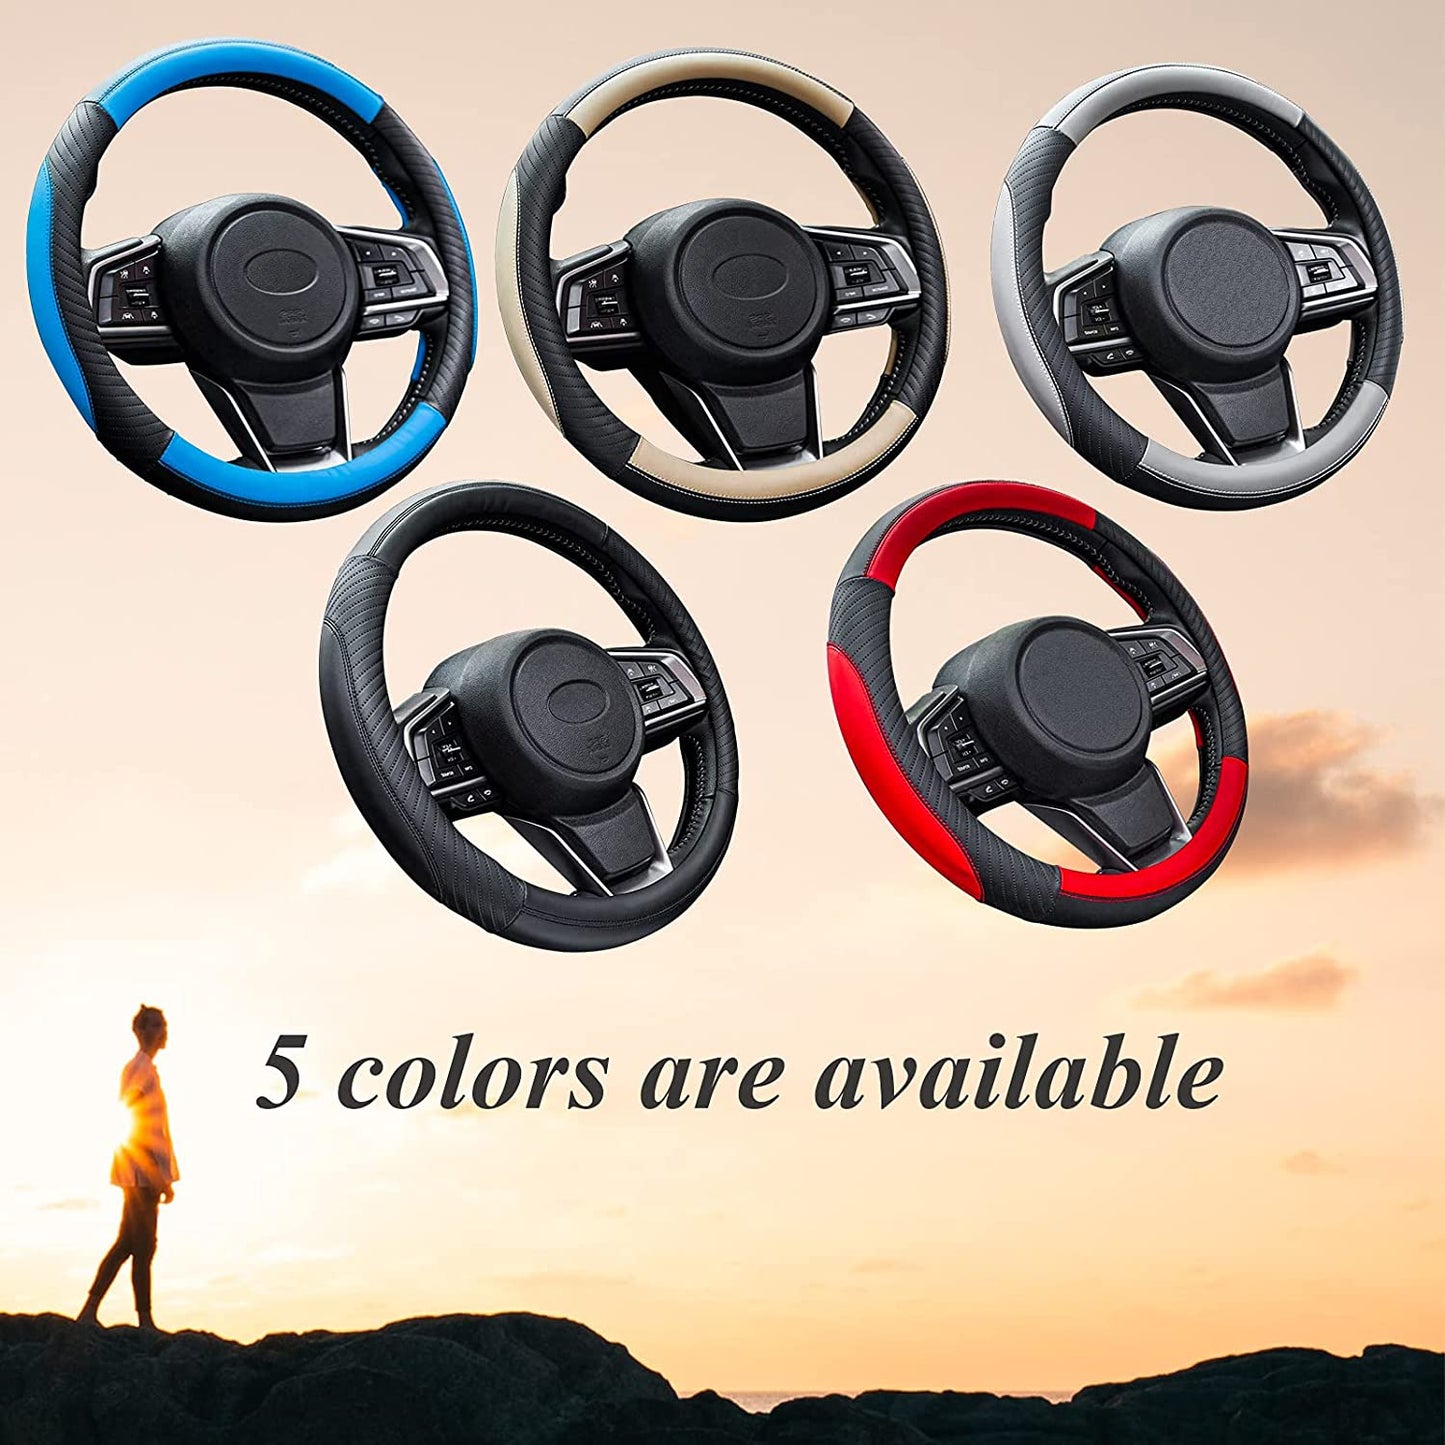 Car Steering Wheel Cover Leather - Soft Microfiber Steering Wheel Cover Universal Size M 37-38Cm /14.5-15Inch, Anti-Slip, Breathable, Red